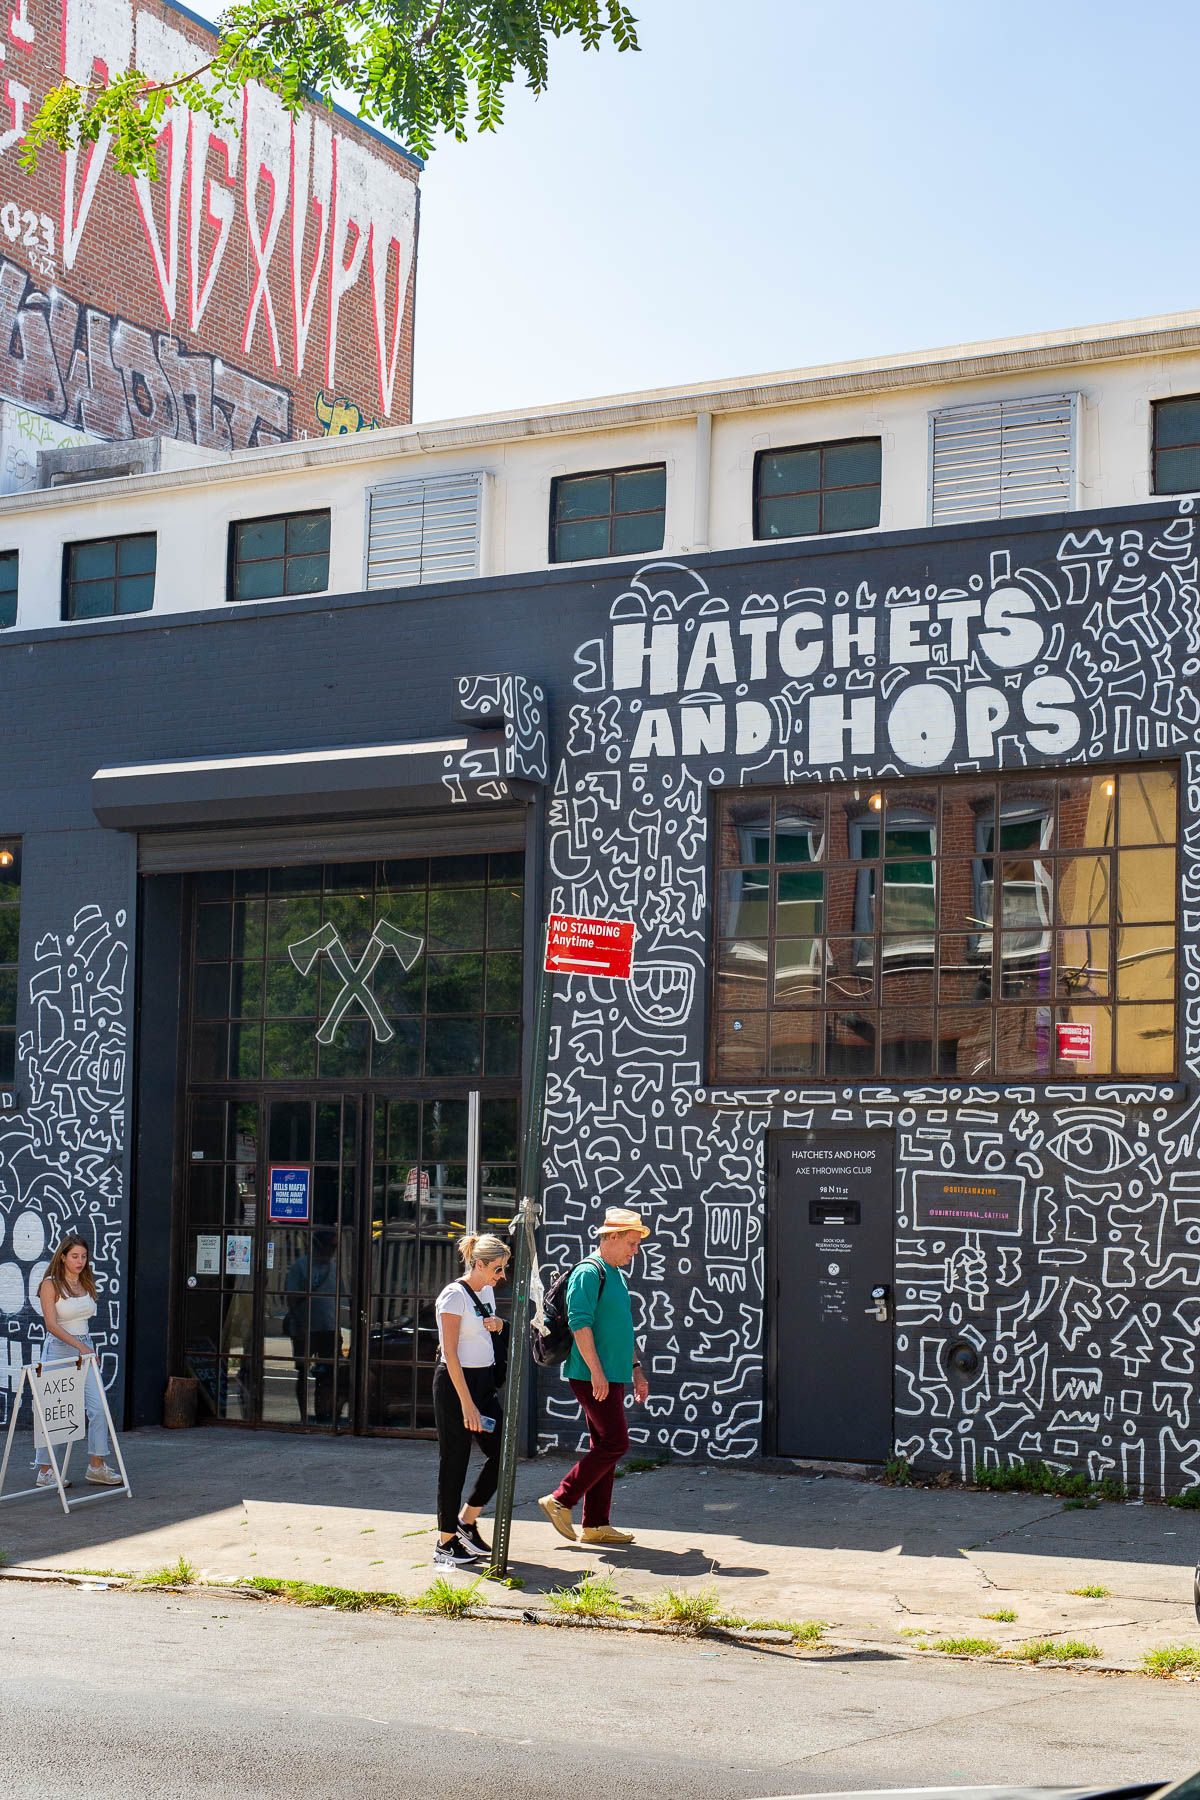 Hatchets and Hops in Williamsburg Brooklyn